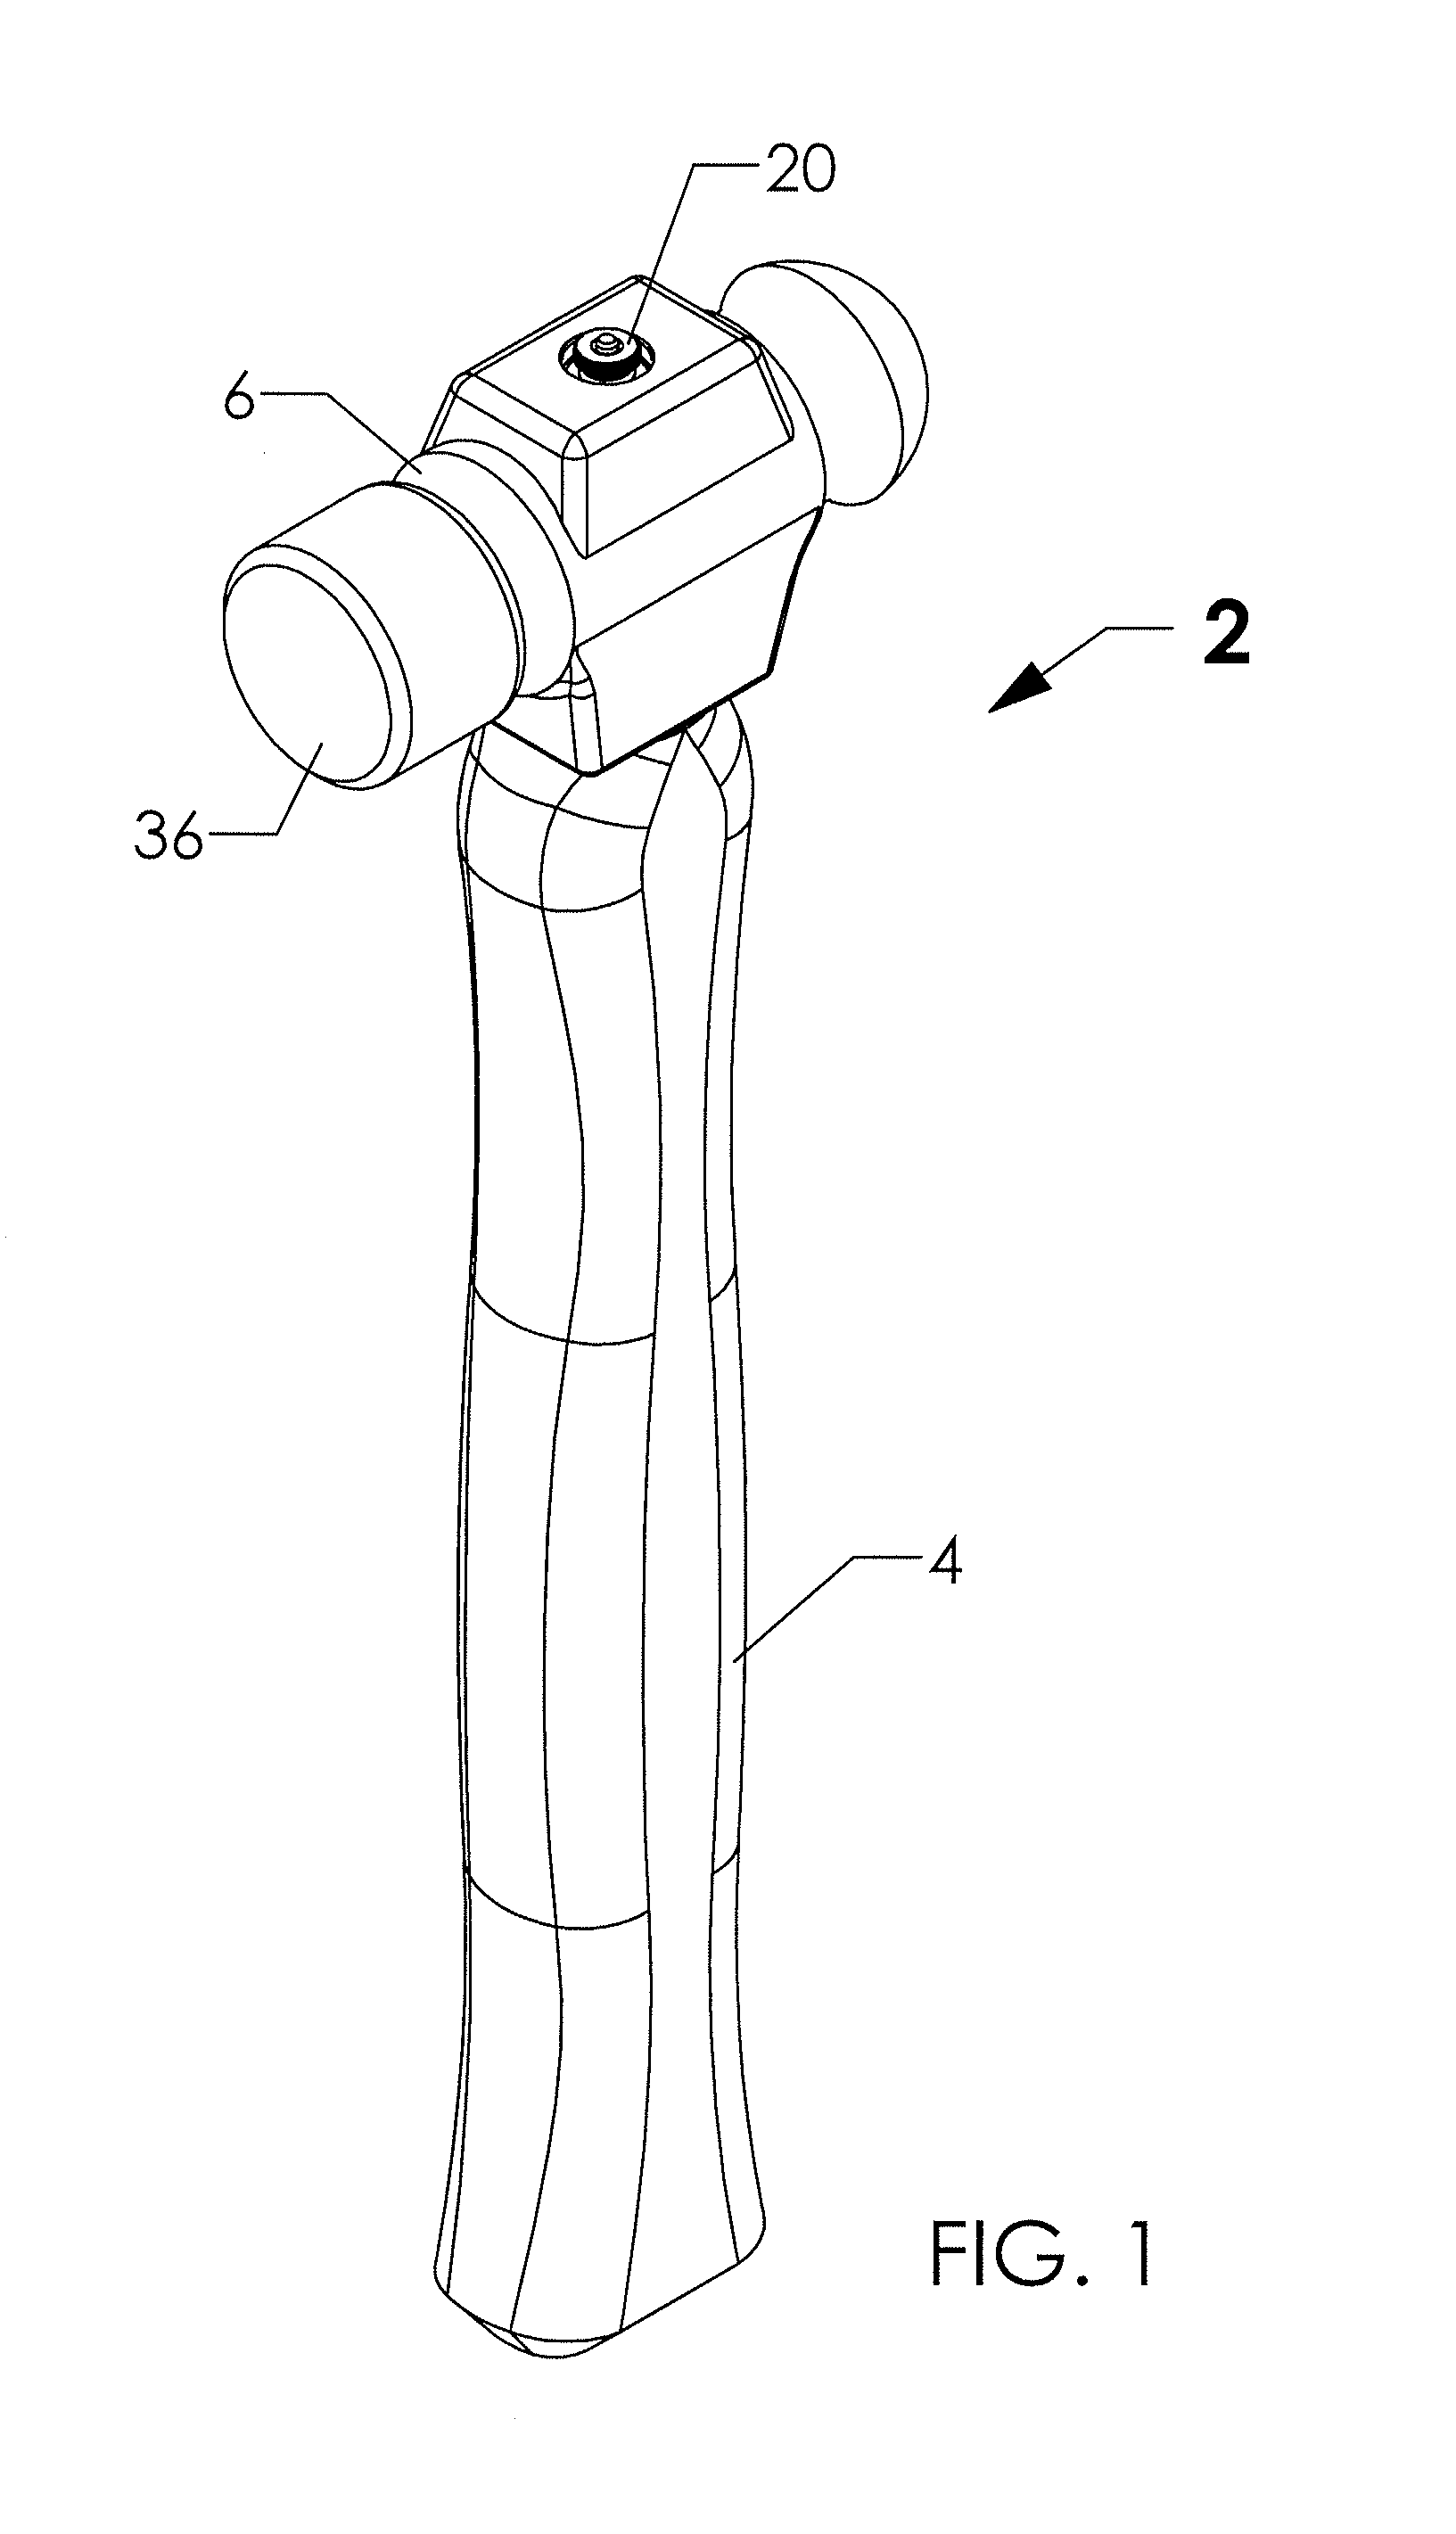 Striking device with sliding weight for increasing impact force